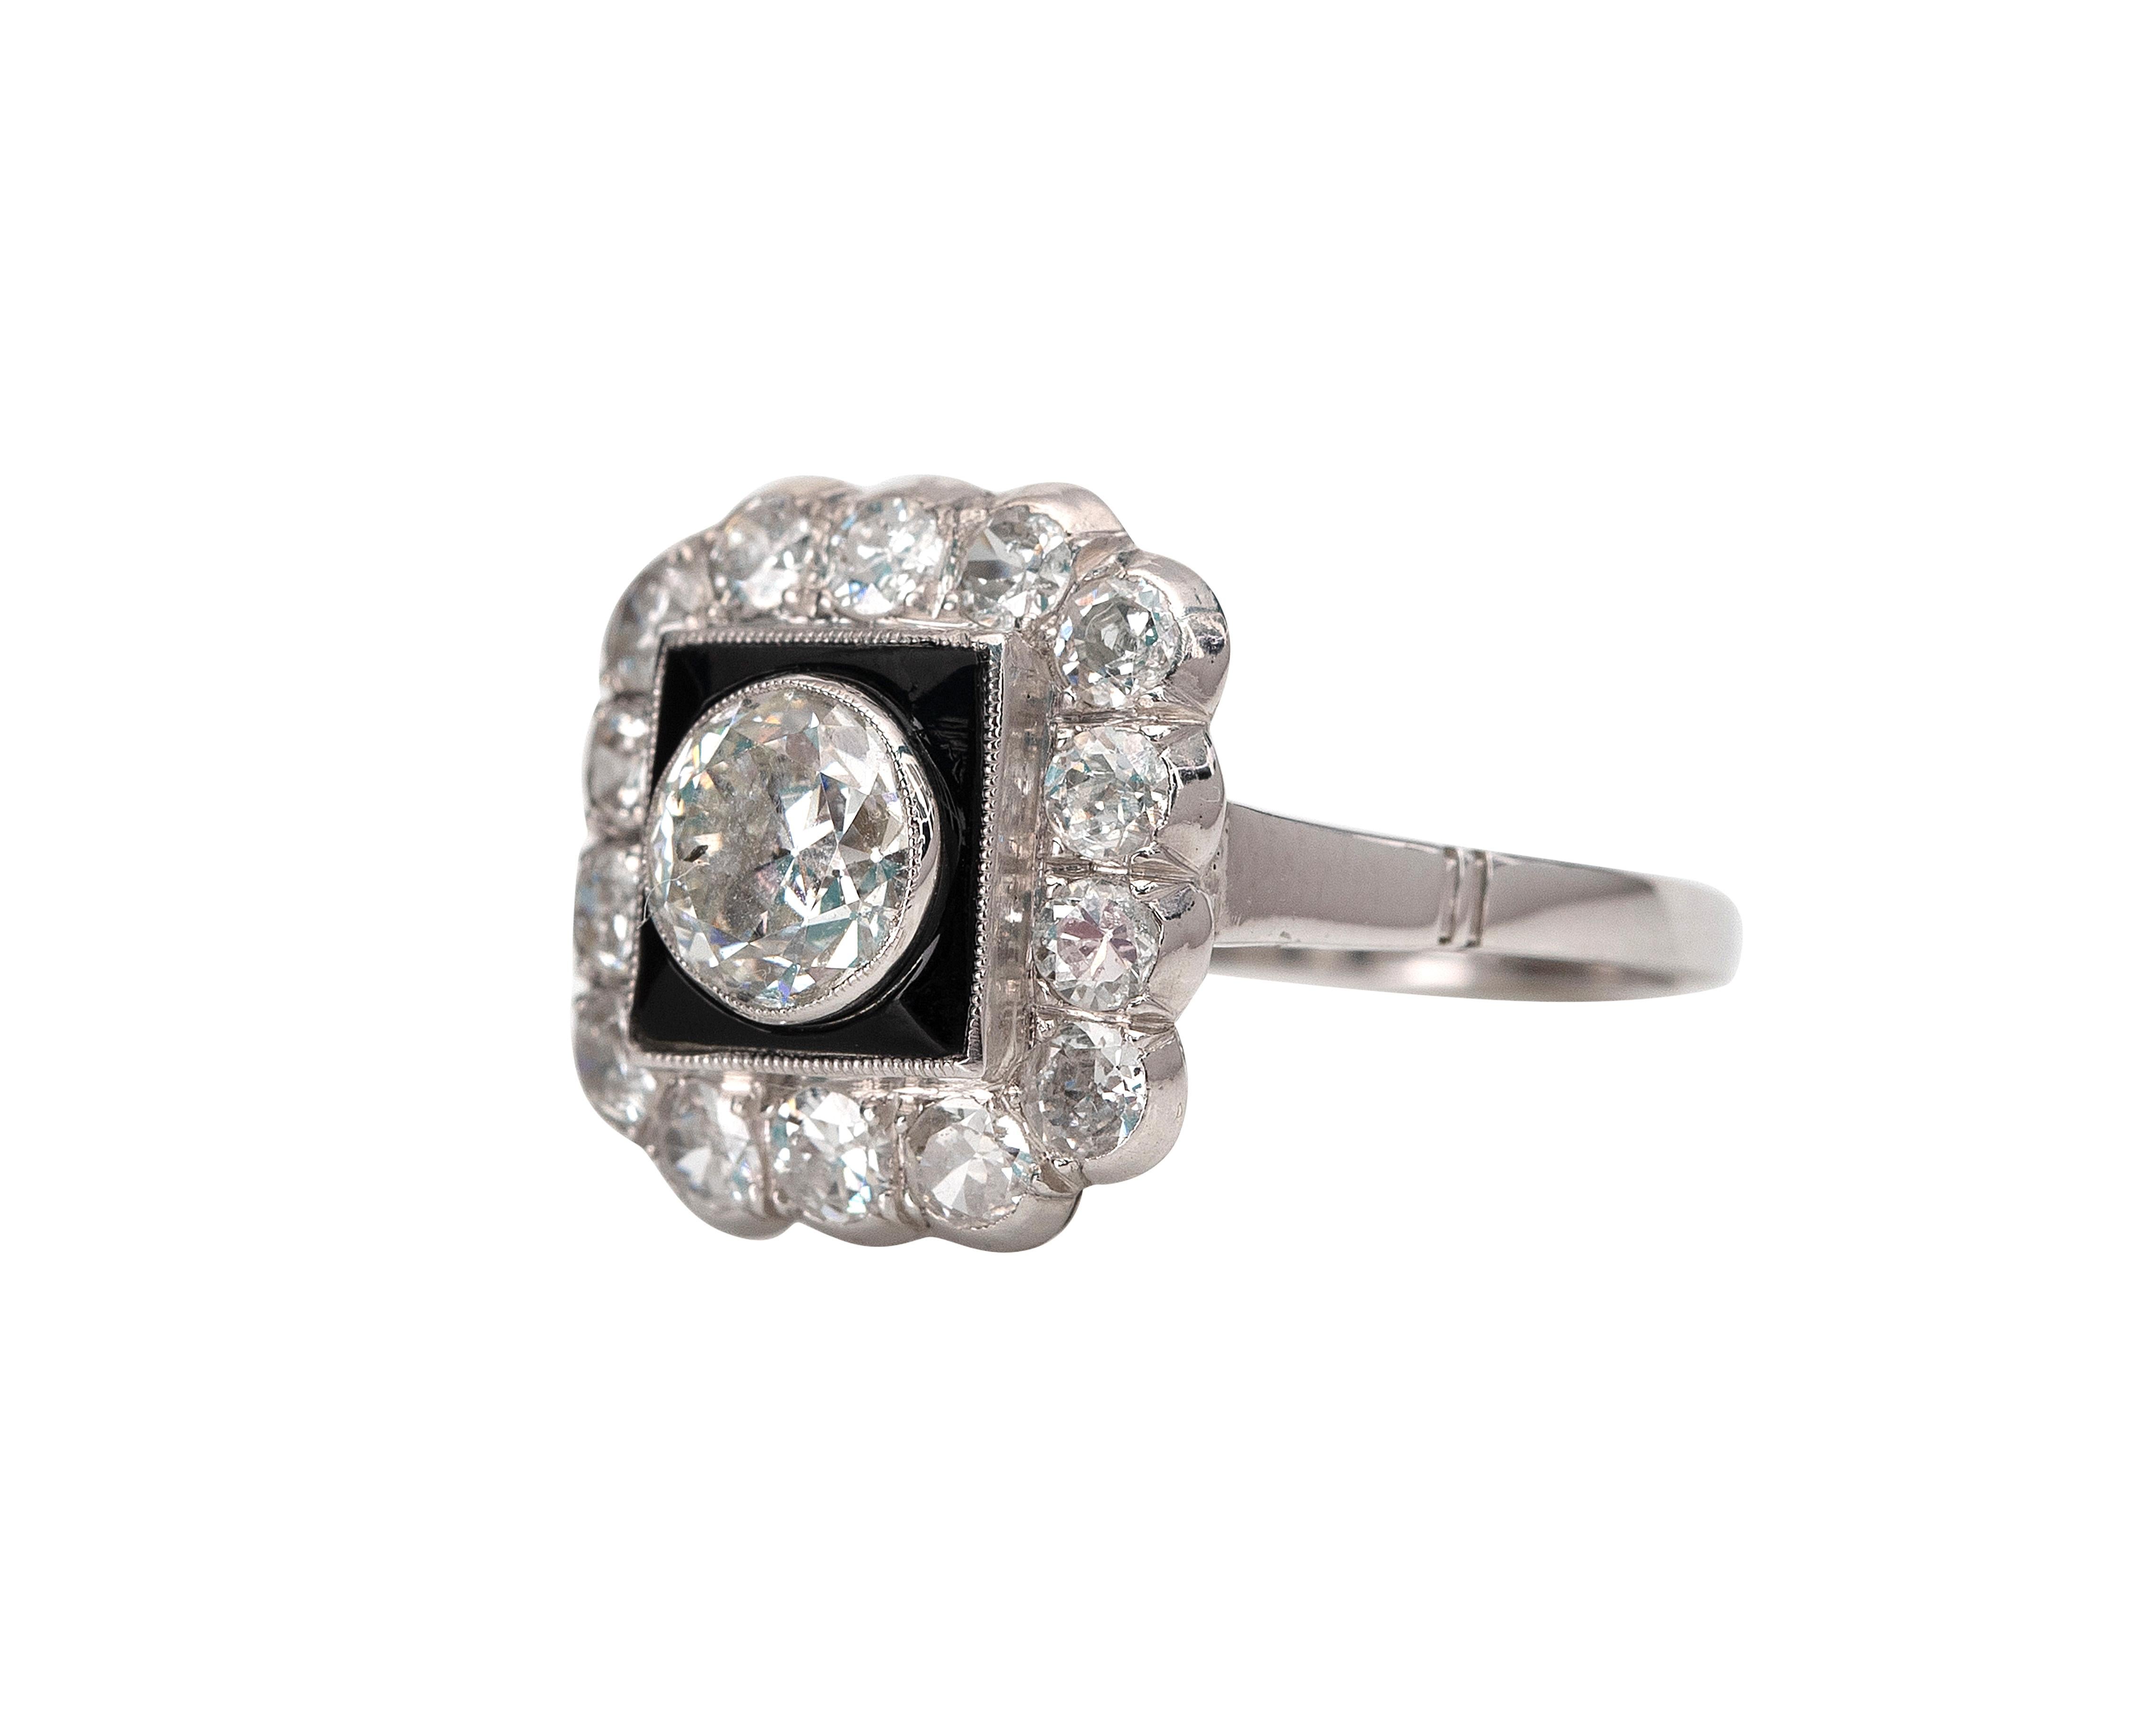 Art Deco 1.93 Carat Old Cut Diamond Ring with Black Onyx White Gold Square Halo Ring